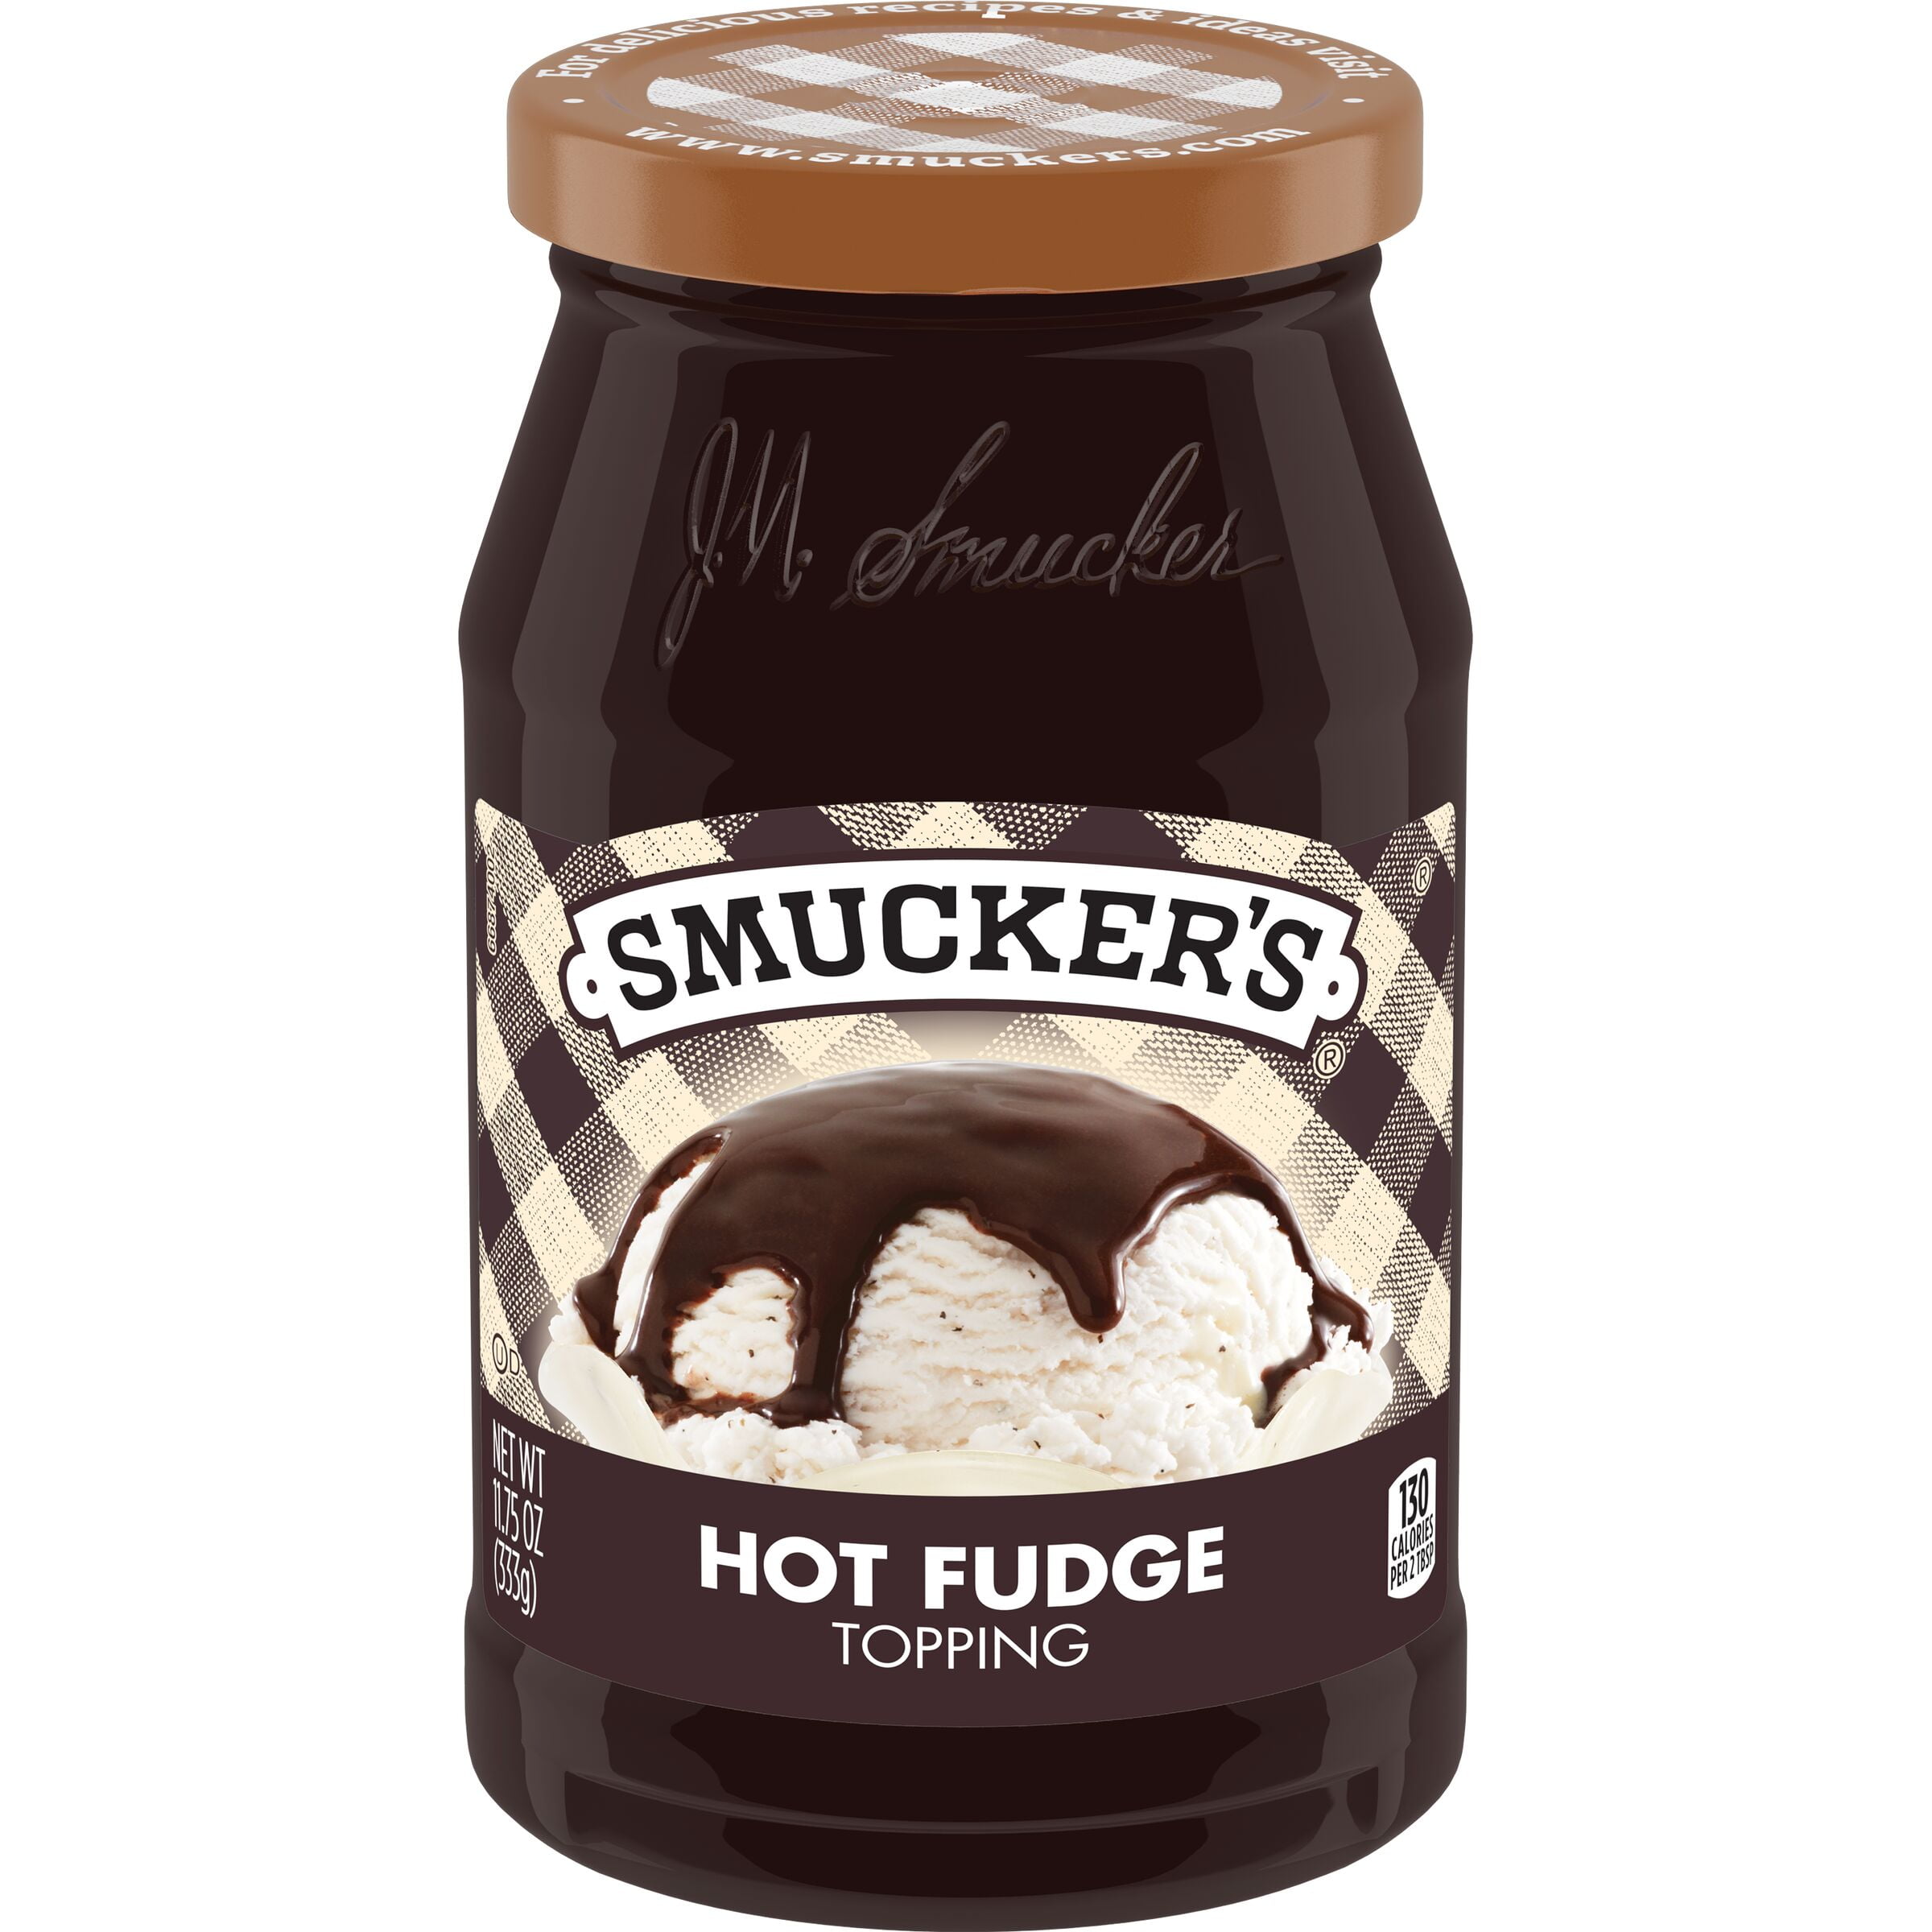 Smucker's Hot Fudge Topping, 11.75 Ounces